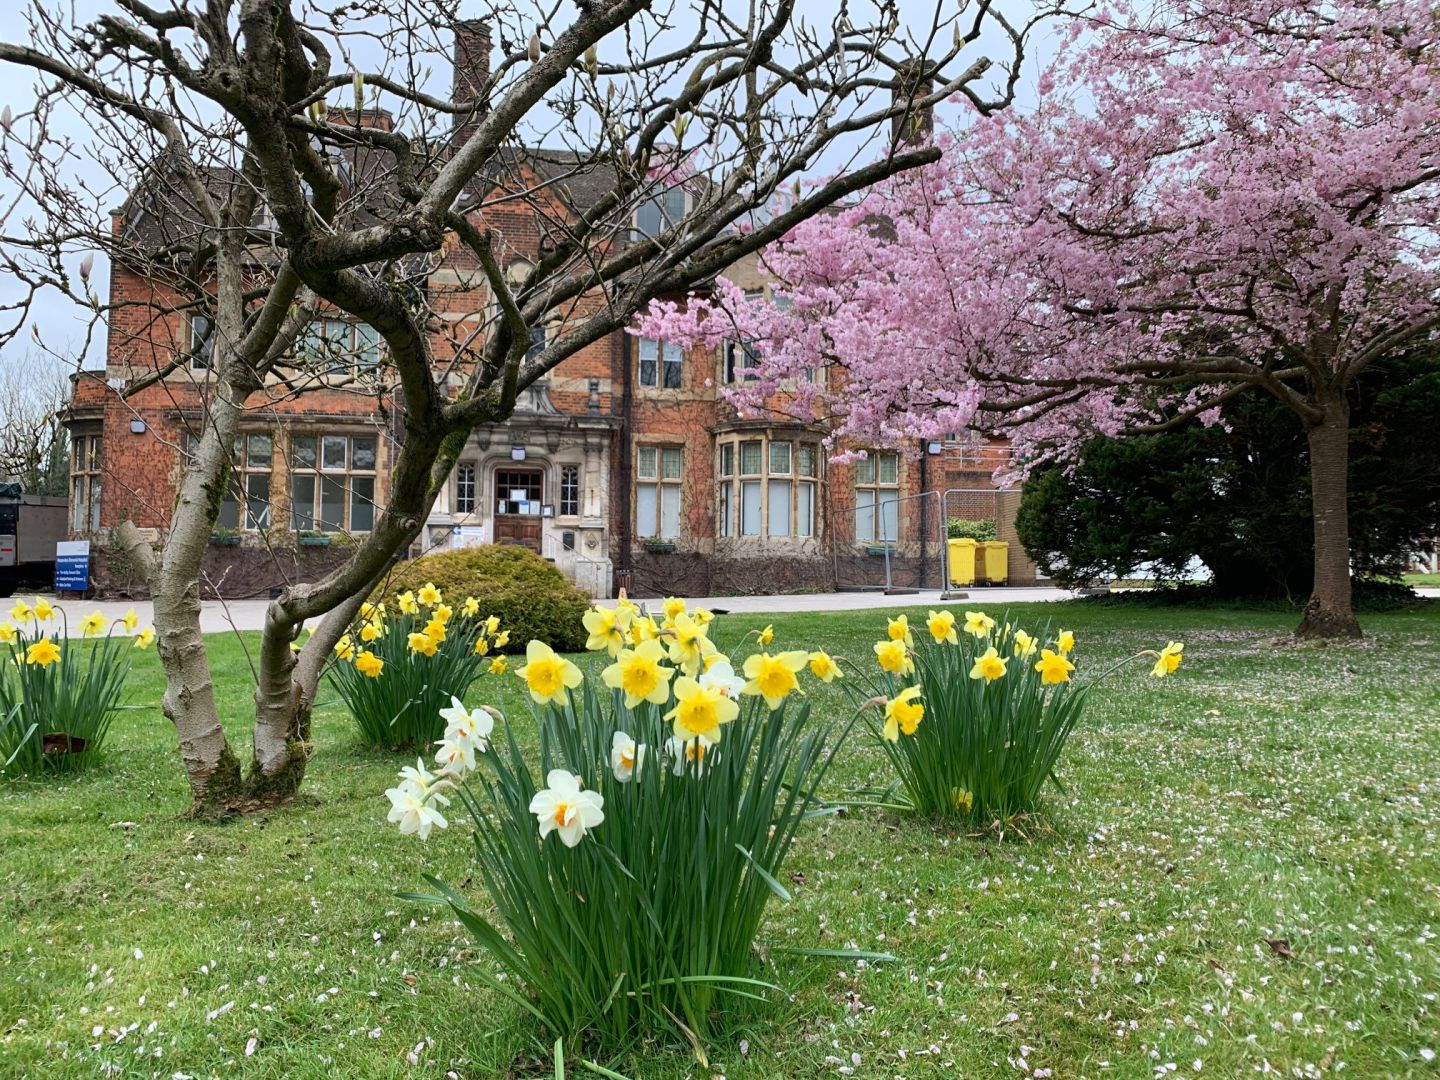 Image of Harpenden Memorial Hospital in the spring with daffodils and cherry blossom tree in front of the building